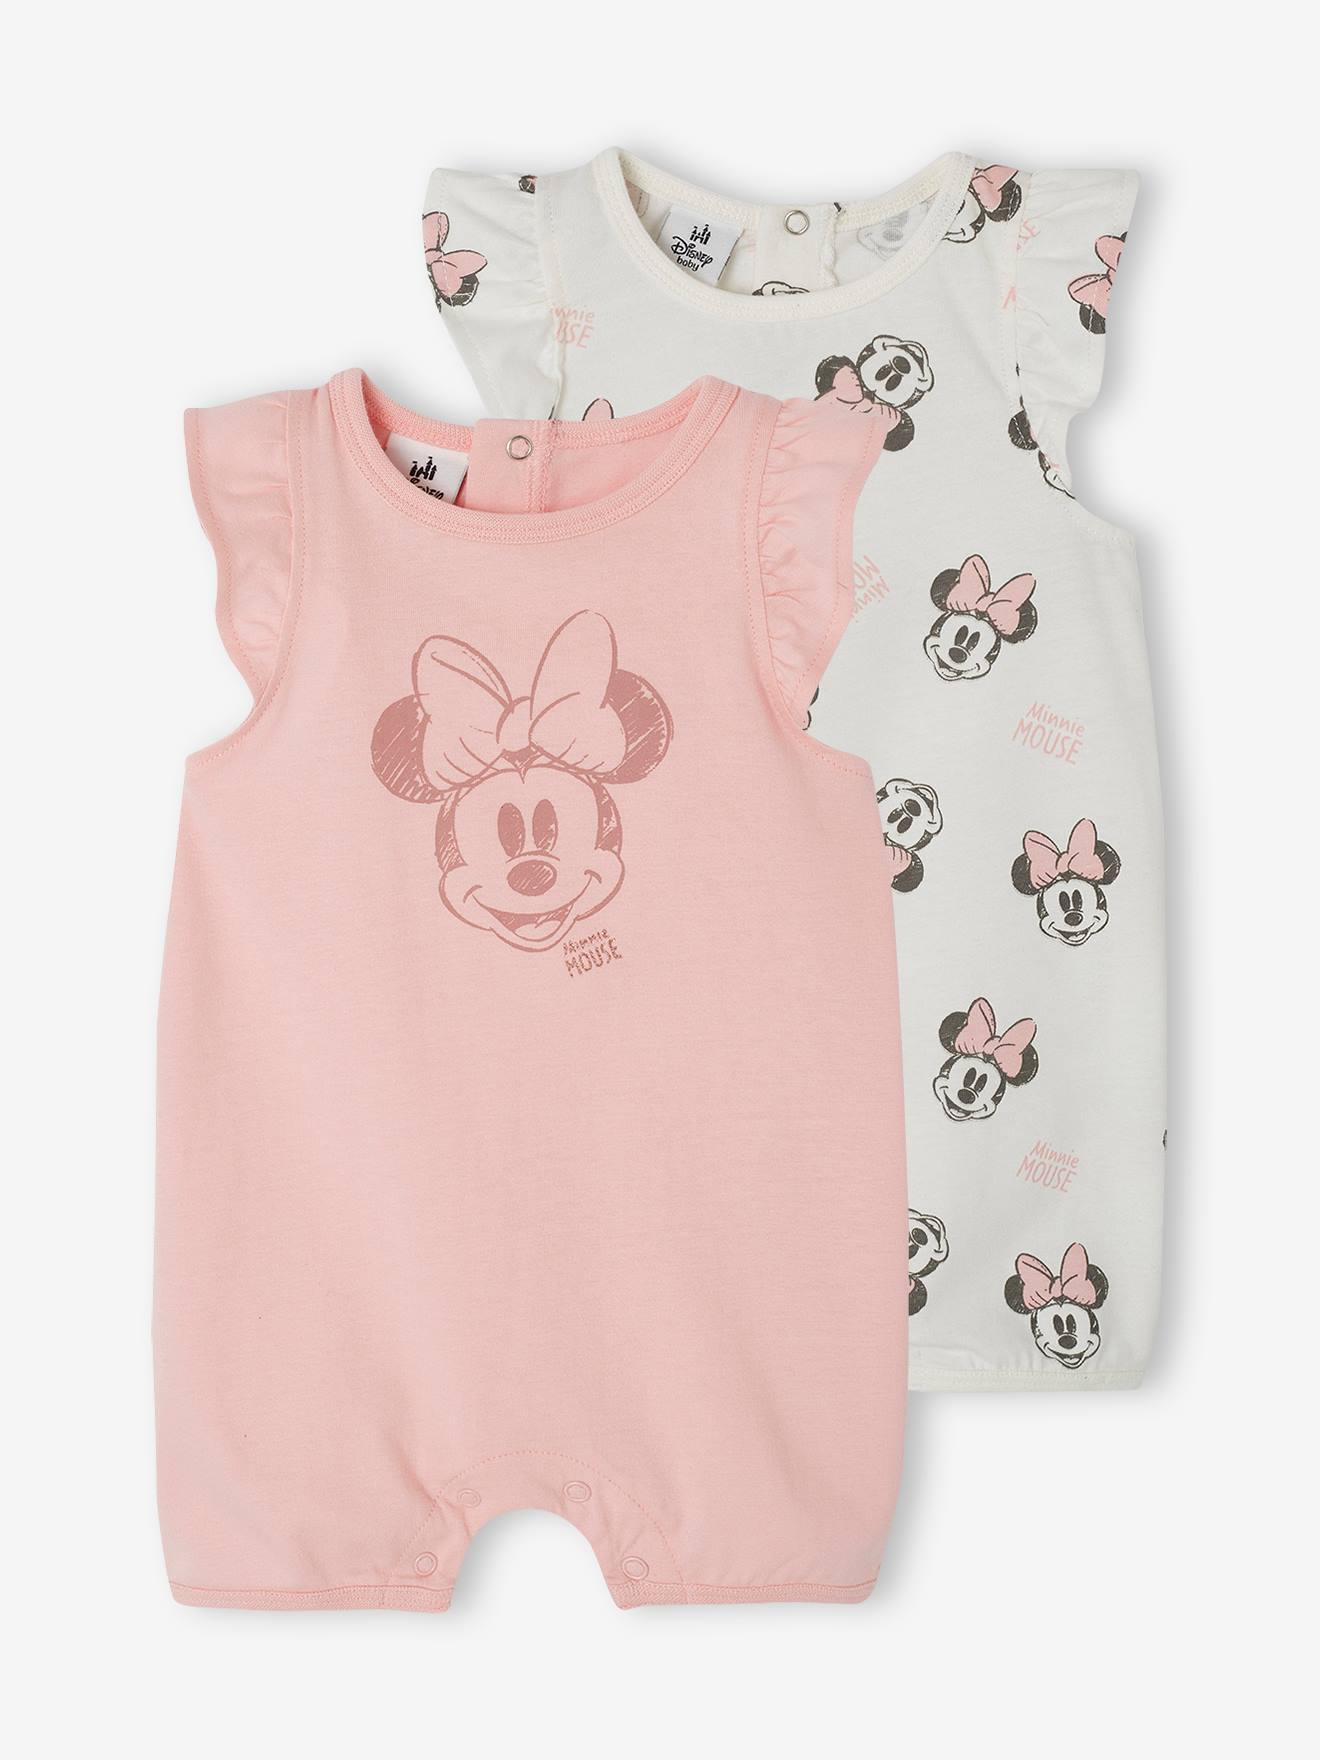 Pack of 2 Minnie Mouse Bodysuits for Baby Girls by Disney(r) rose